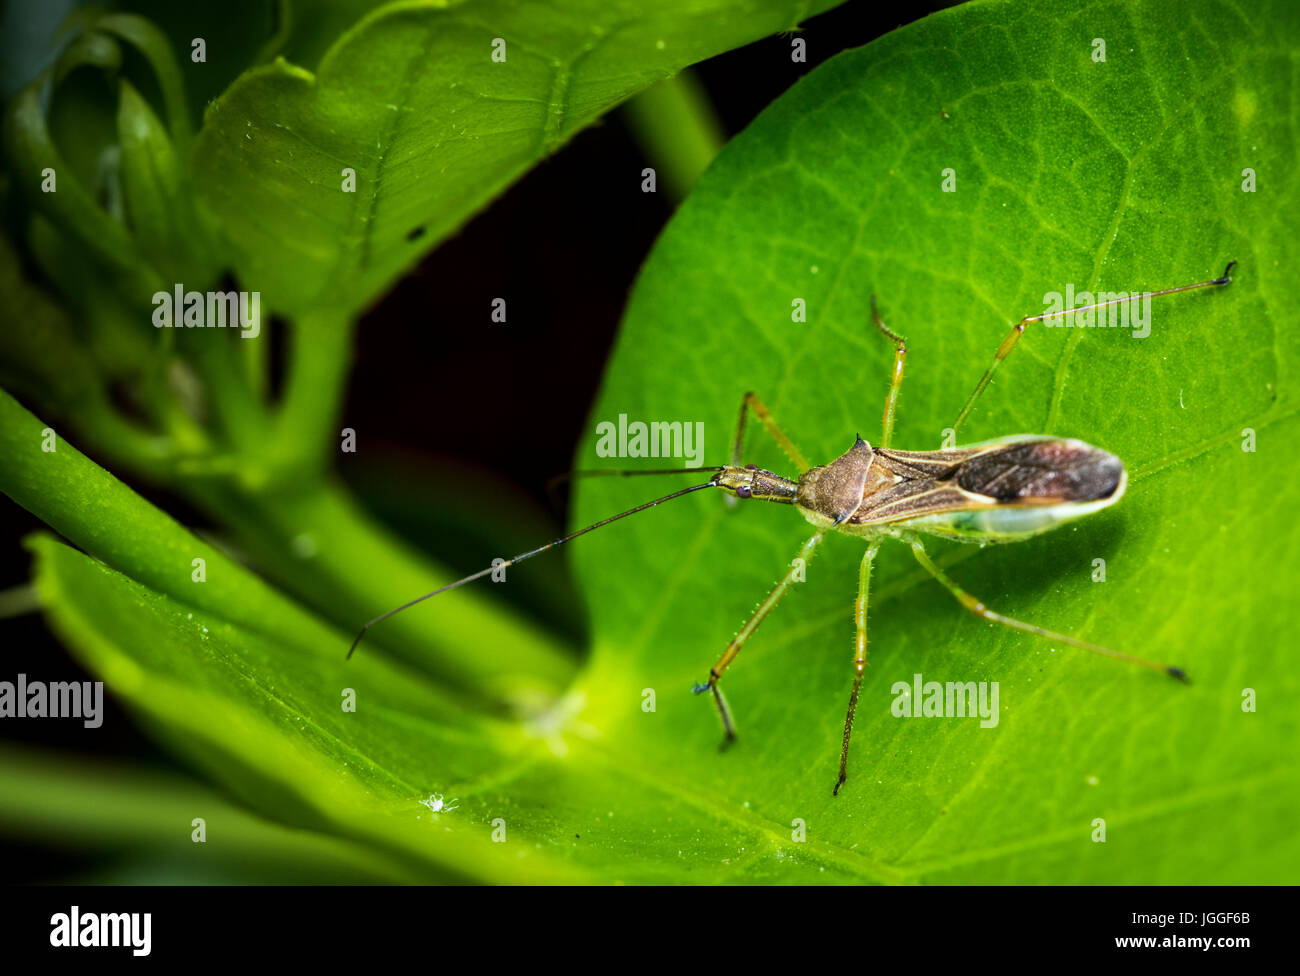 Alydidae insect on a plant leaf Stock Photo